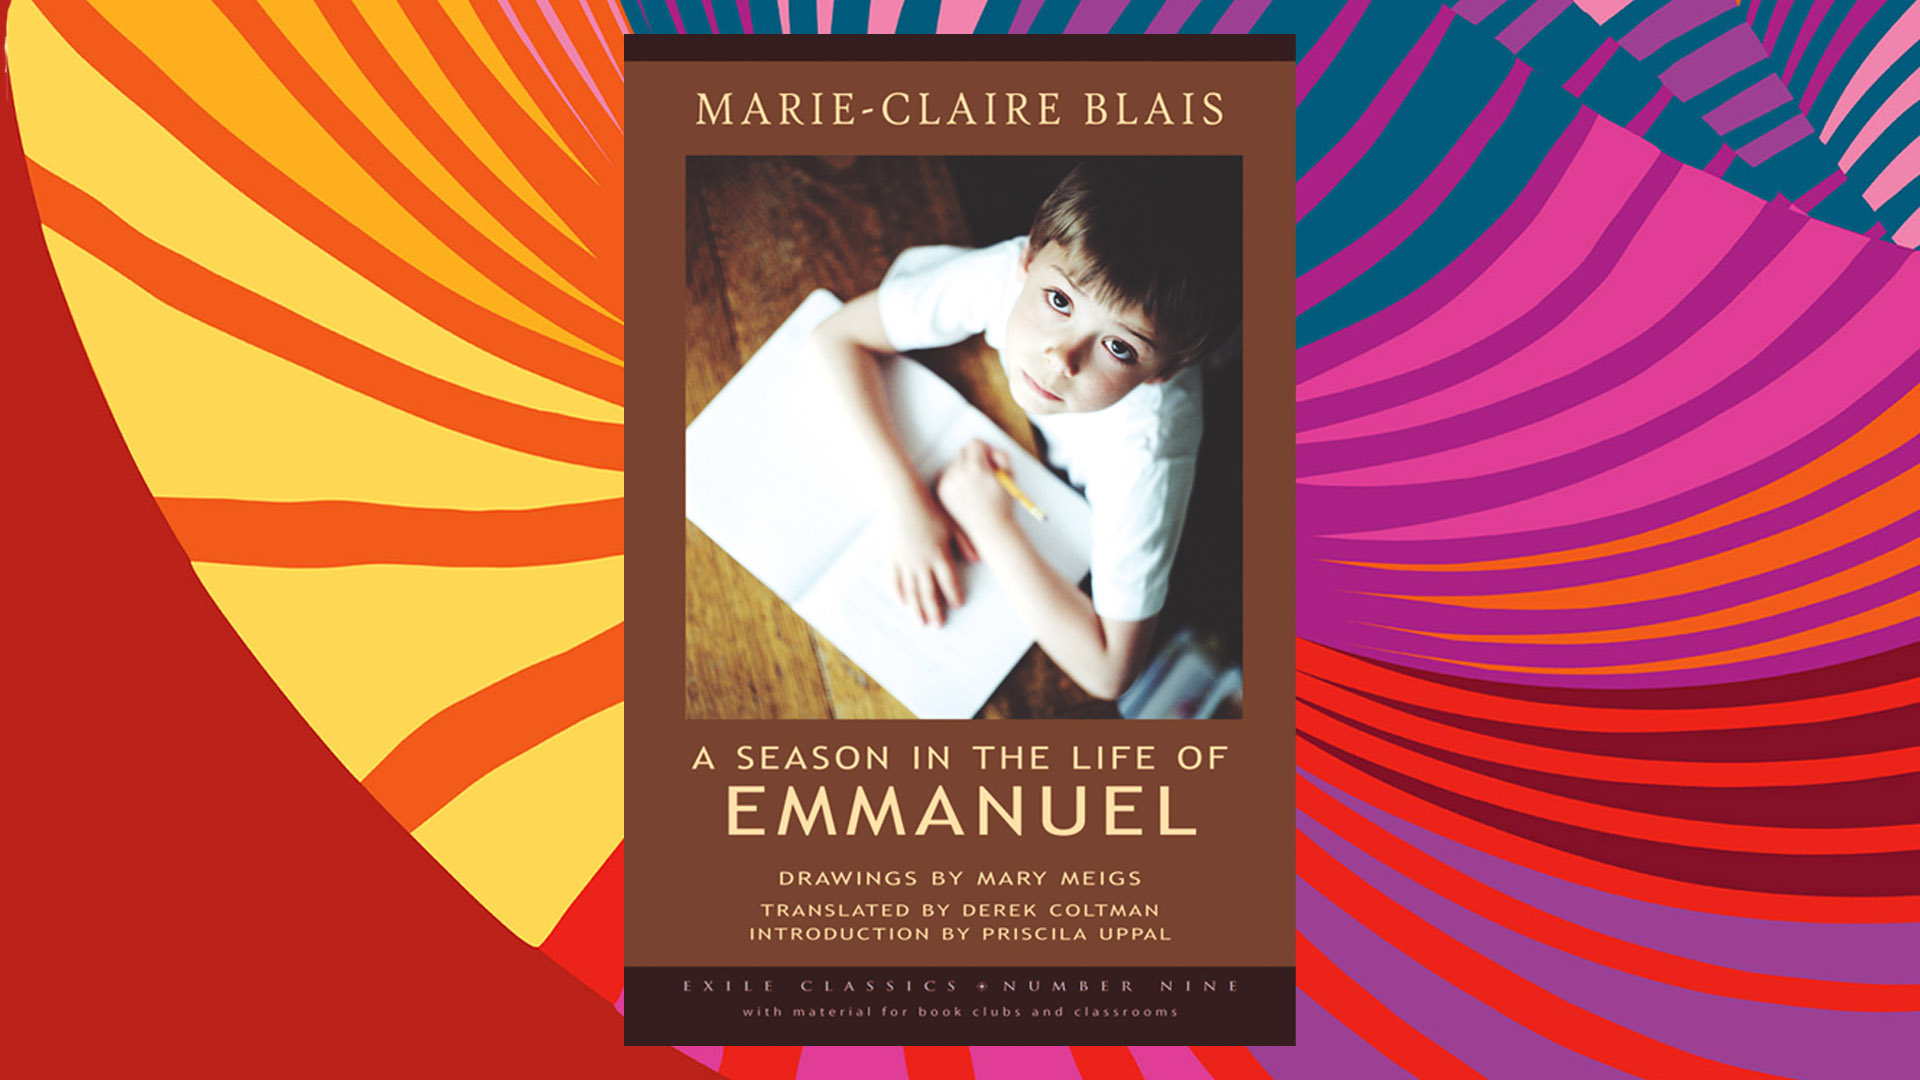 A Season in the Life of Emmanuel book cover